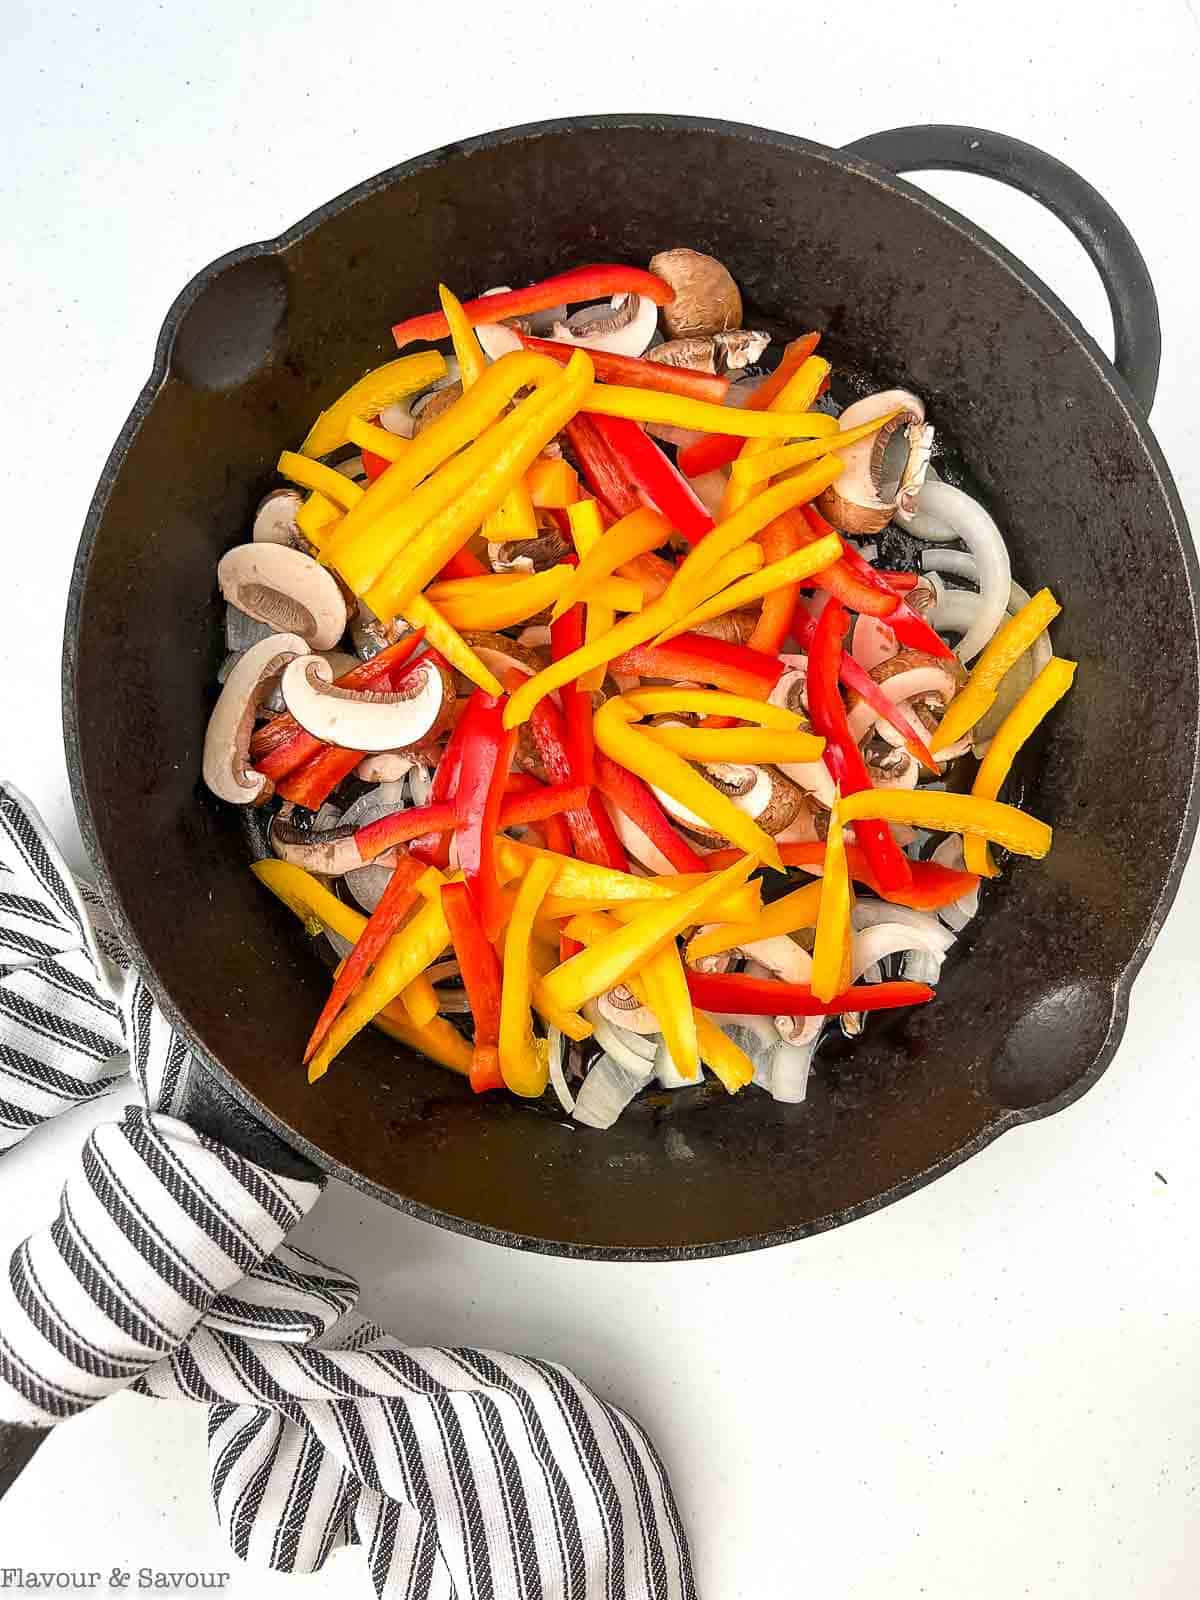 Sliced peppers, onions, and mushrooms in a cast iron skillet.